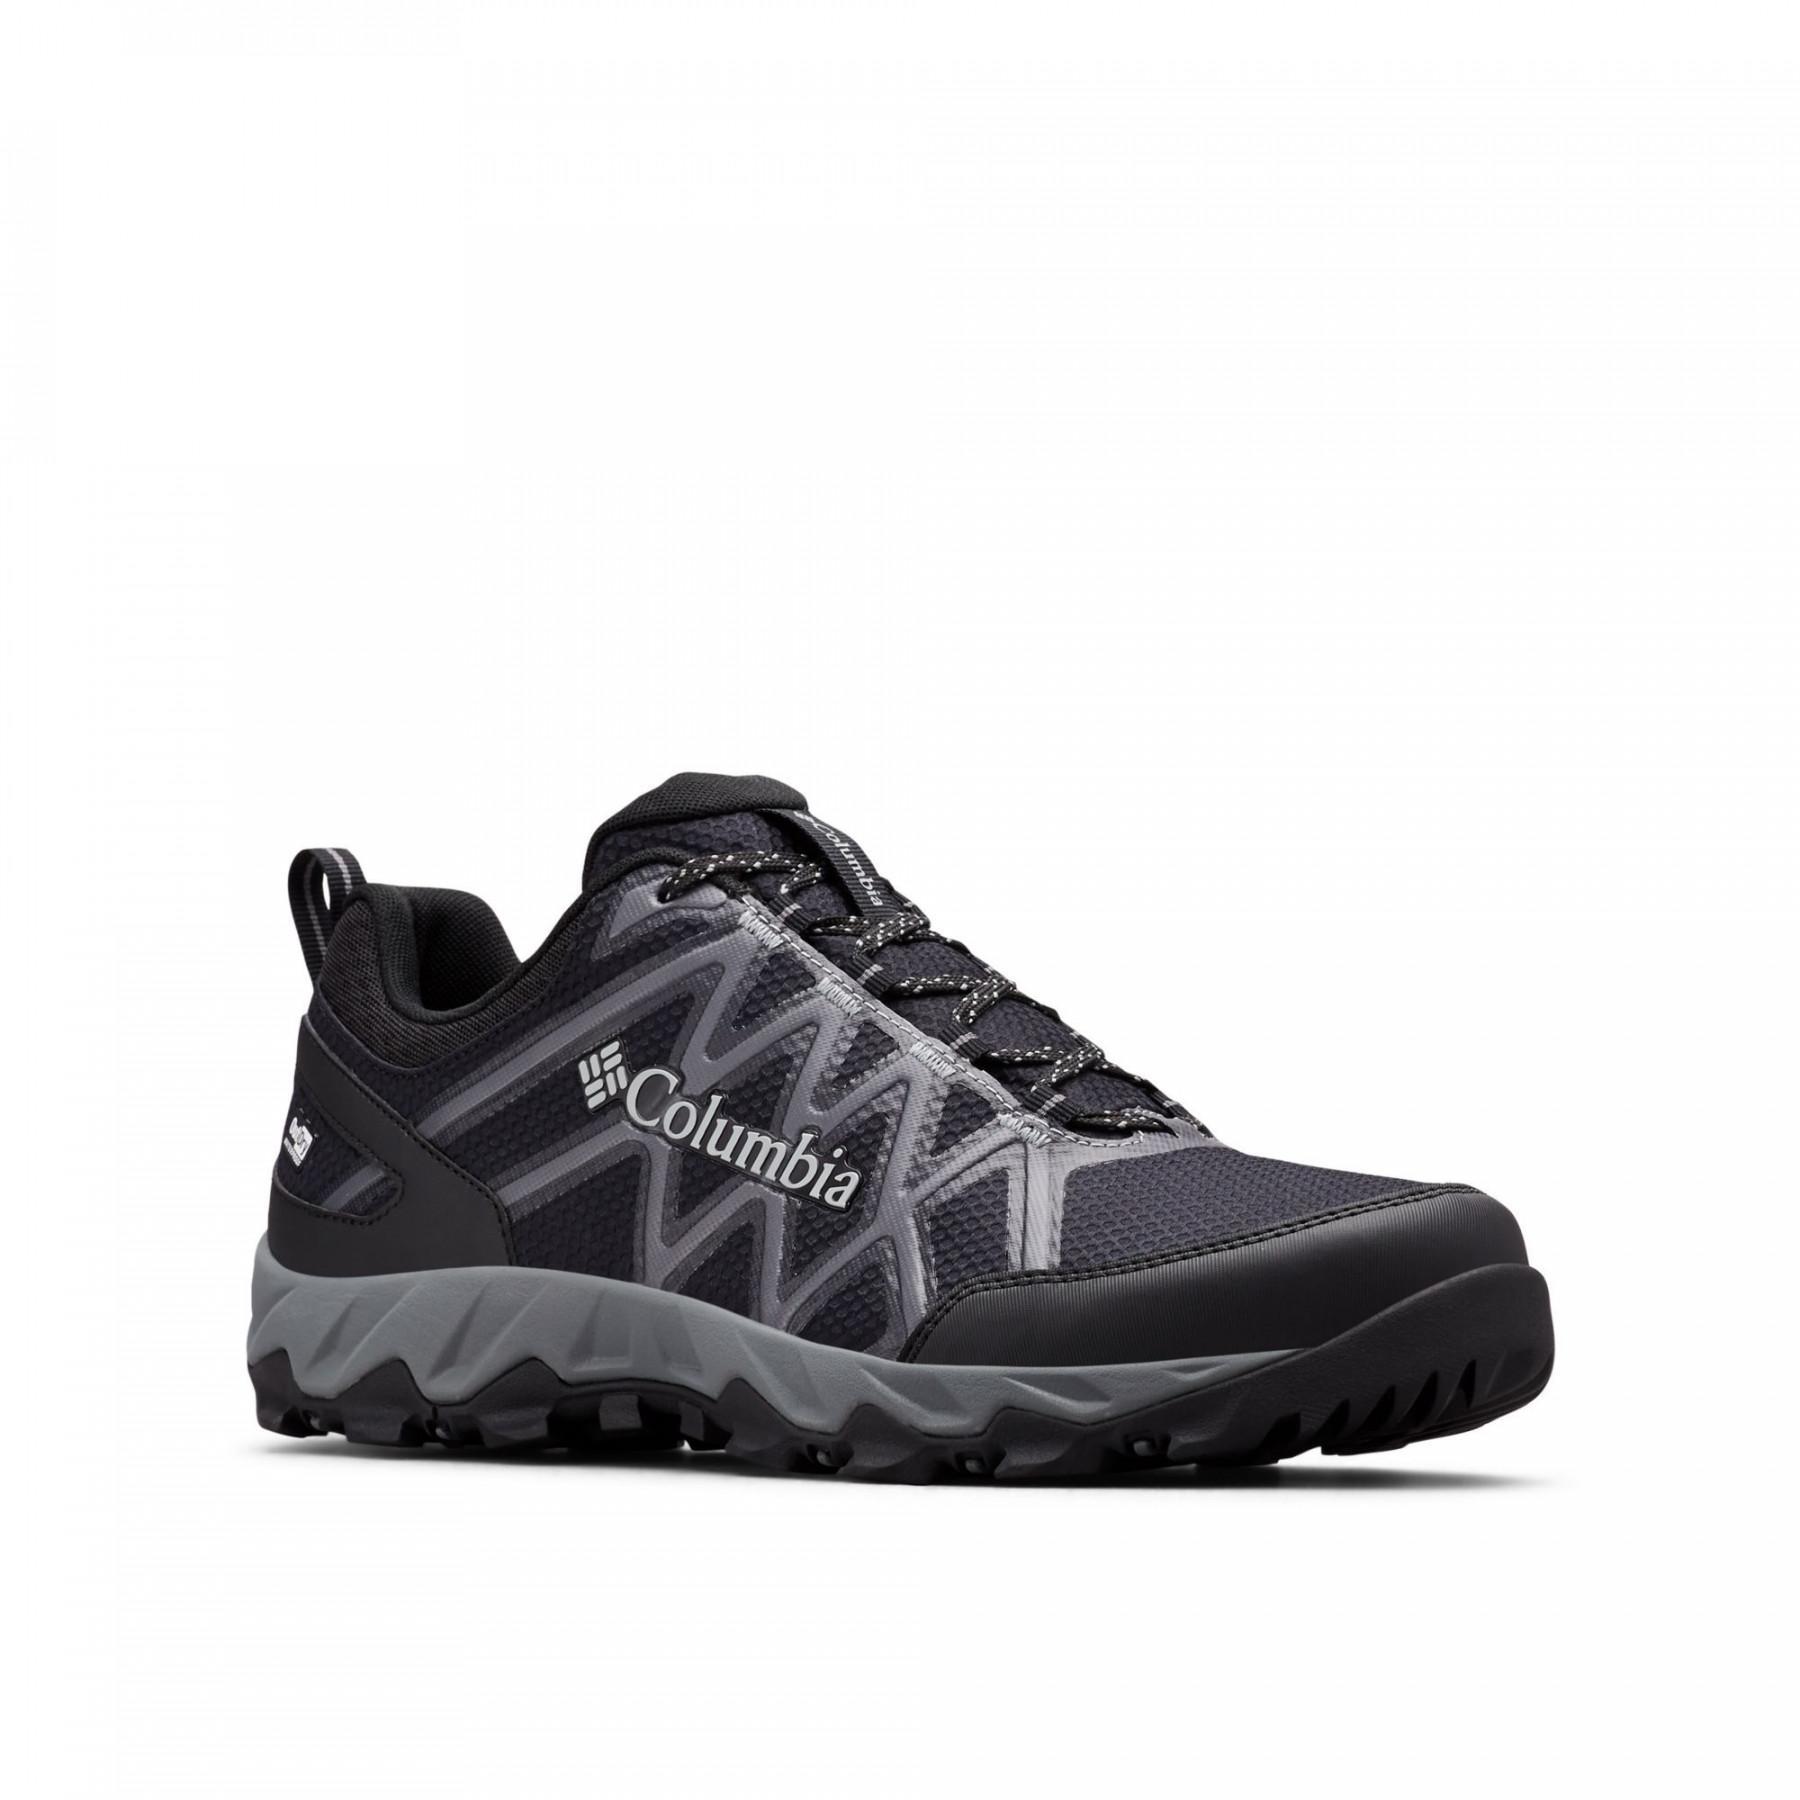 Hiking shoes Columbia Peakfreak X2 Outdry